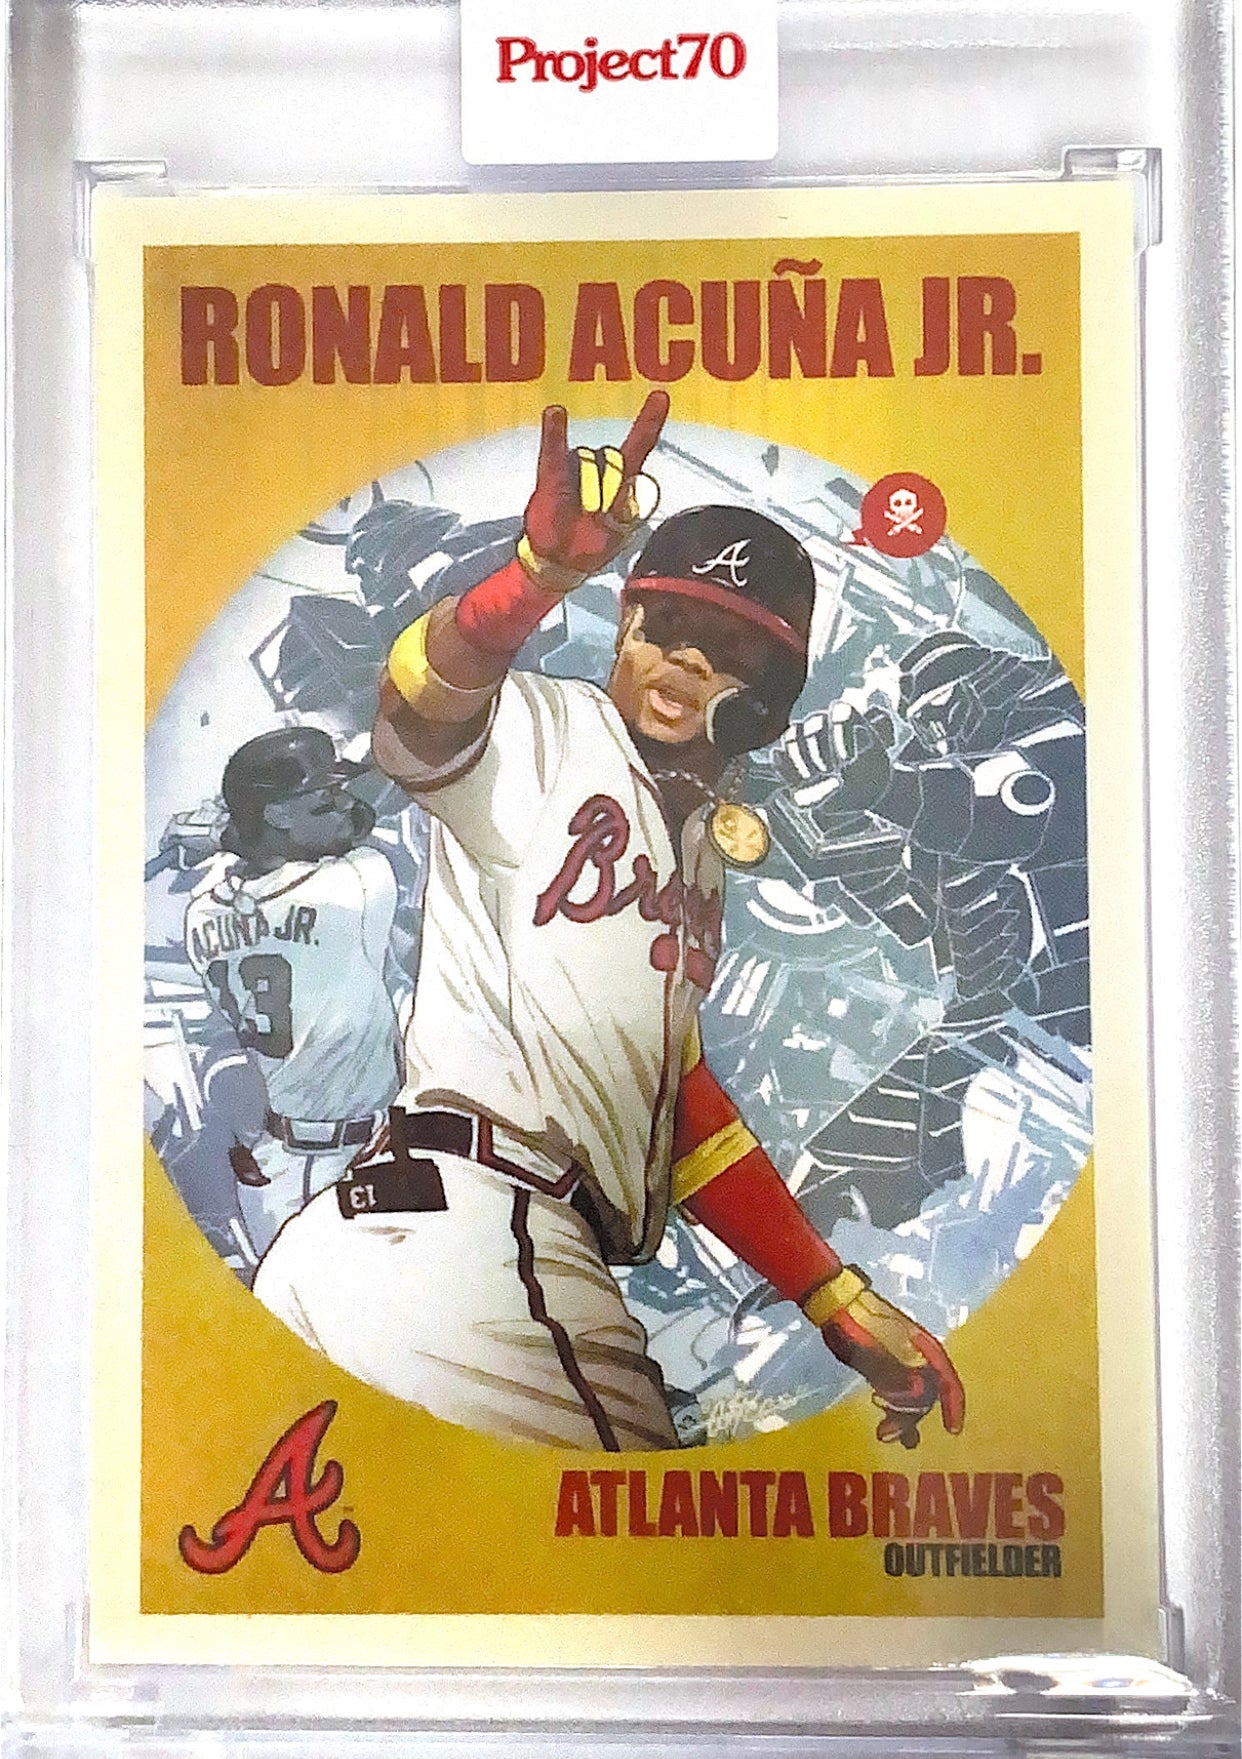 Topps Project 70 - 1959 Ronald Acuna Jr. by Quiccs